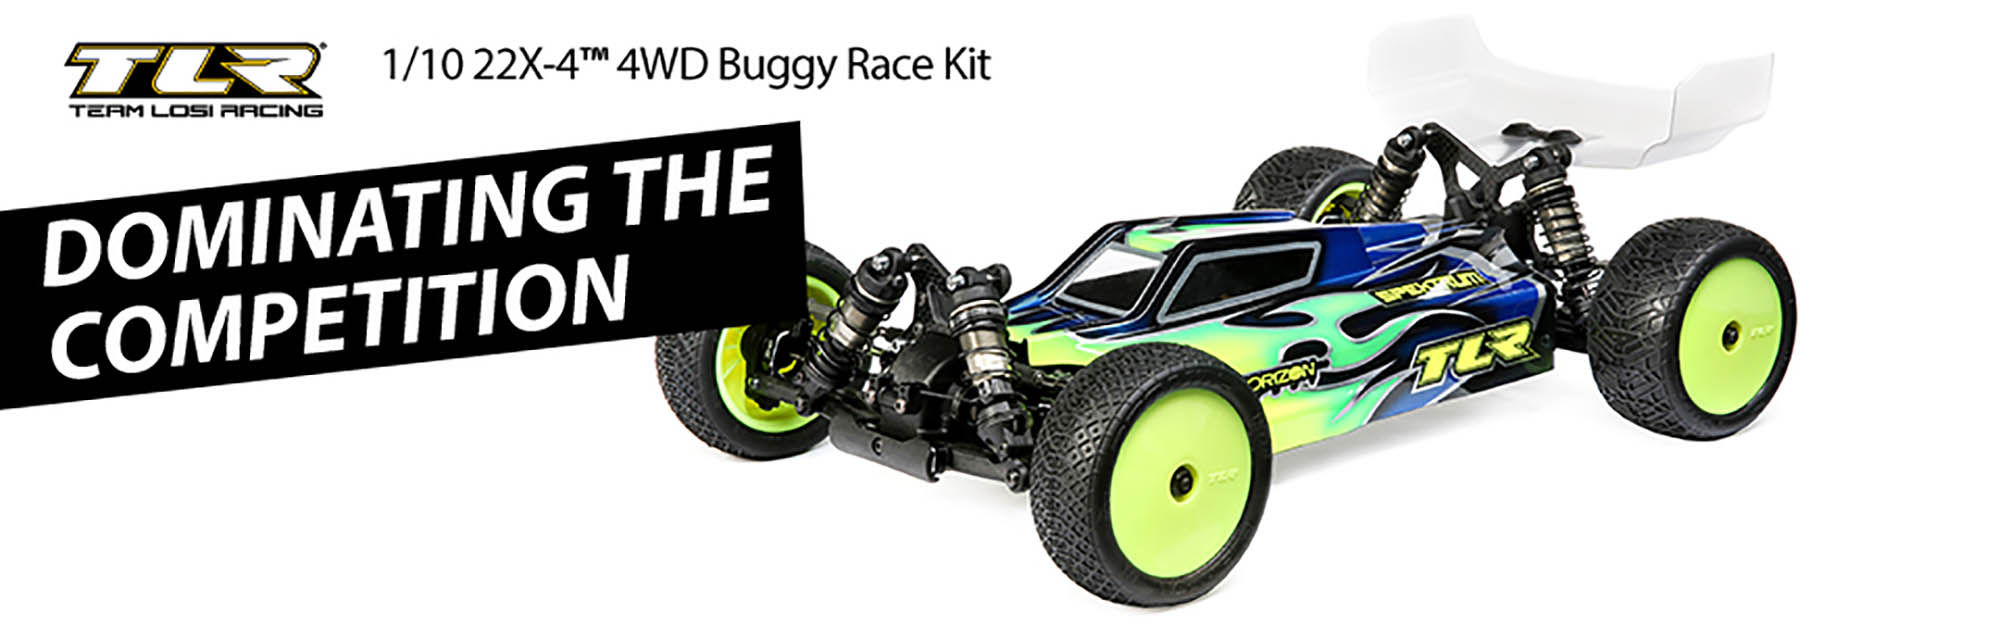 TLR<sup>??</sup> 1/10 22X-4 Race Buggy Kit